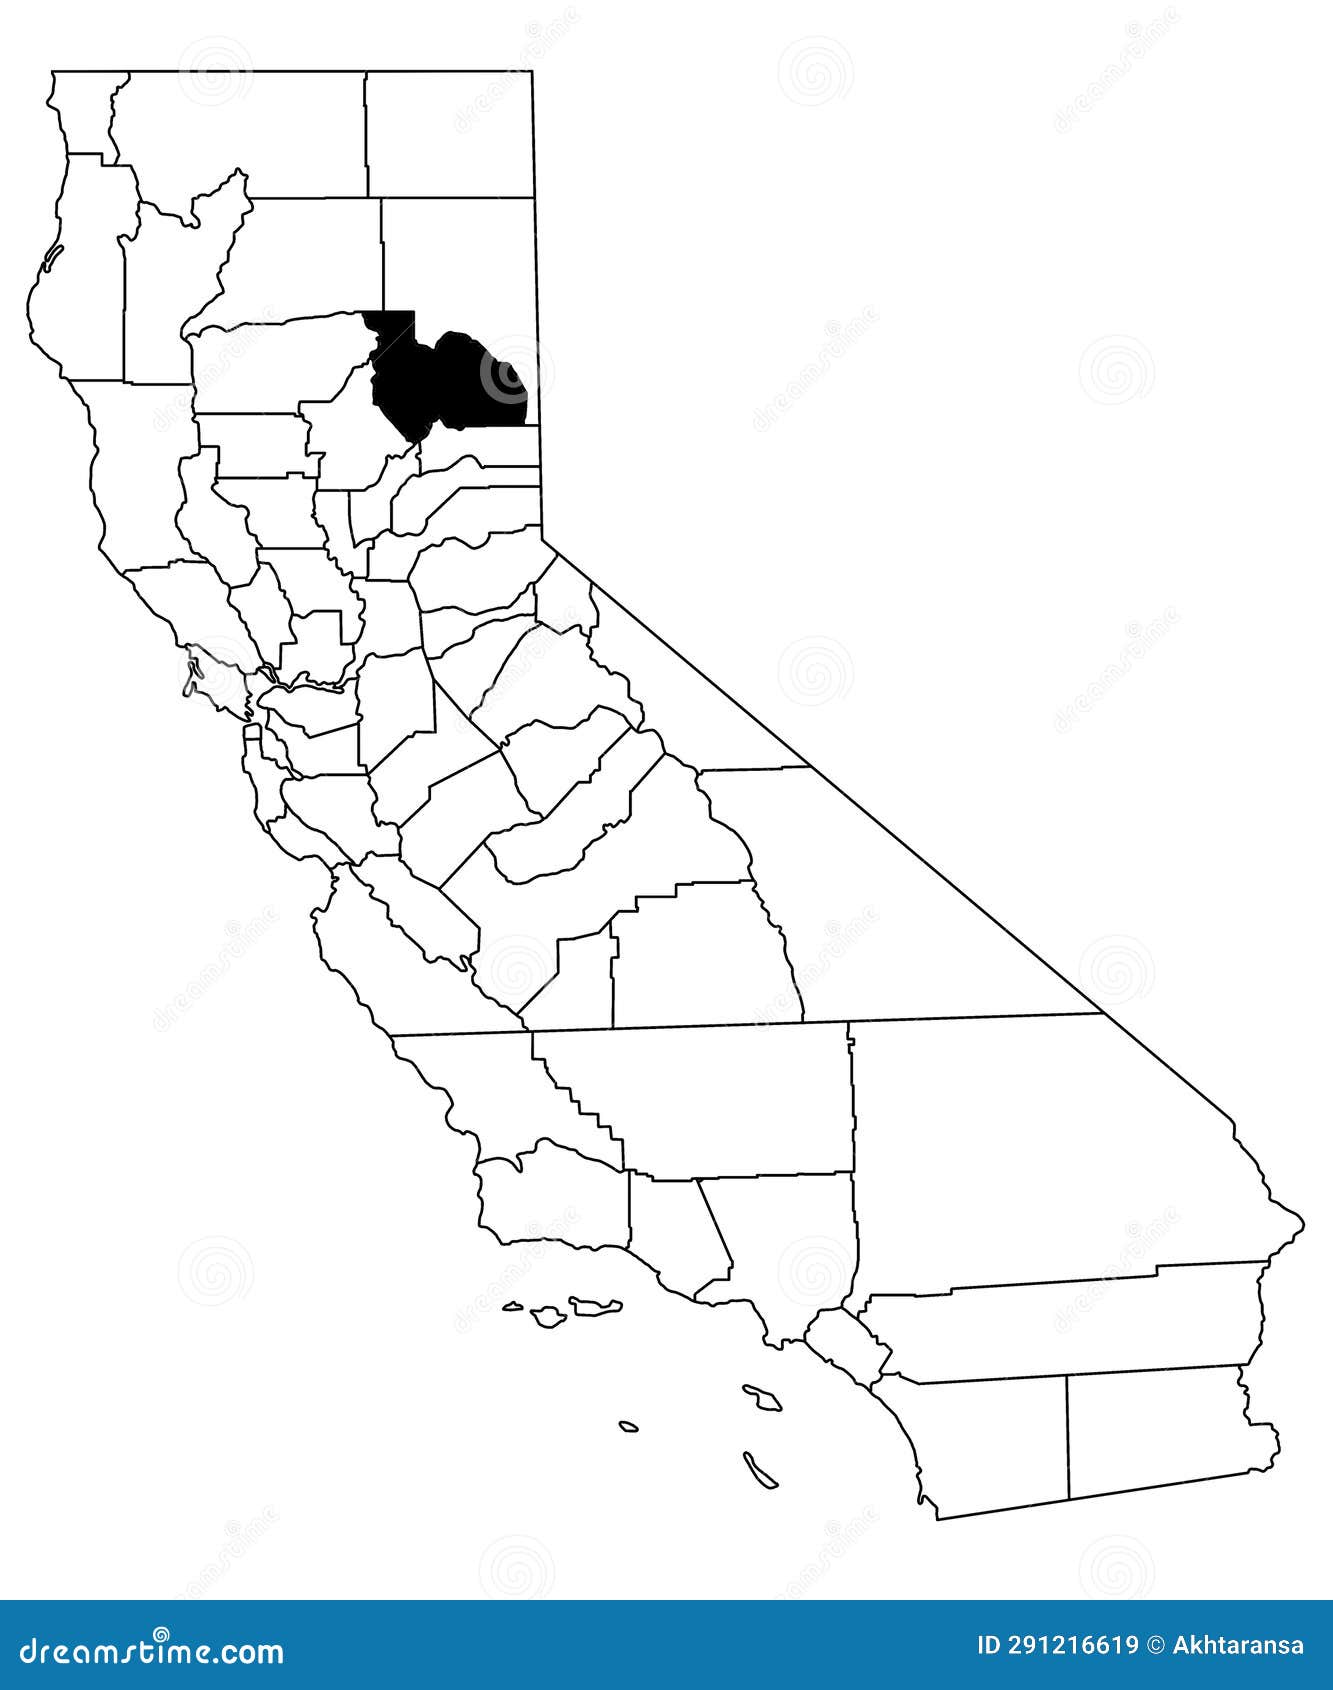 map of plumas county in california state on white background. single county map highlighted by black colour on california map.